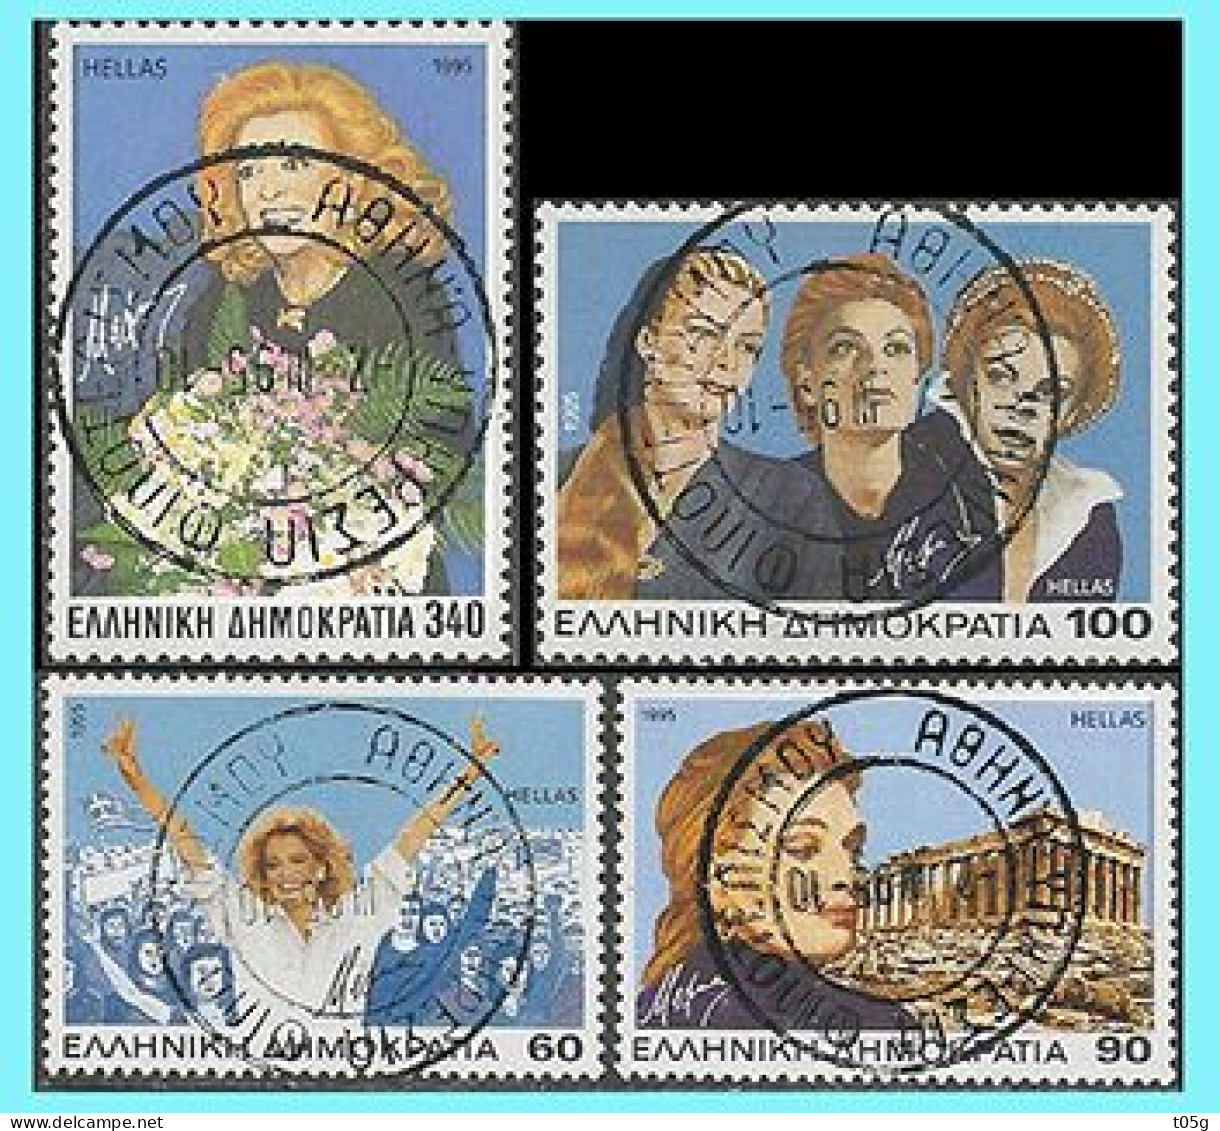 GREECE- GRECE - HELLAS 1995:  (7-III-95  1st First Day Of Issue) Melina Merkouri Compl. Set Used - Gebraucht